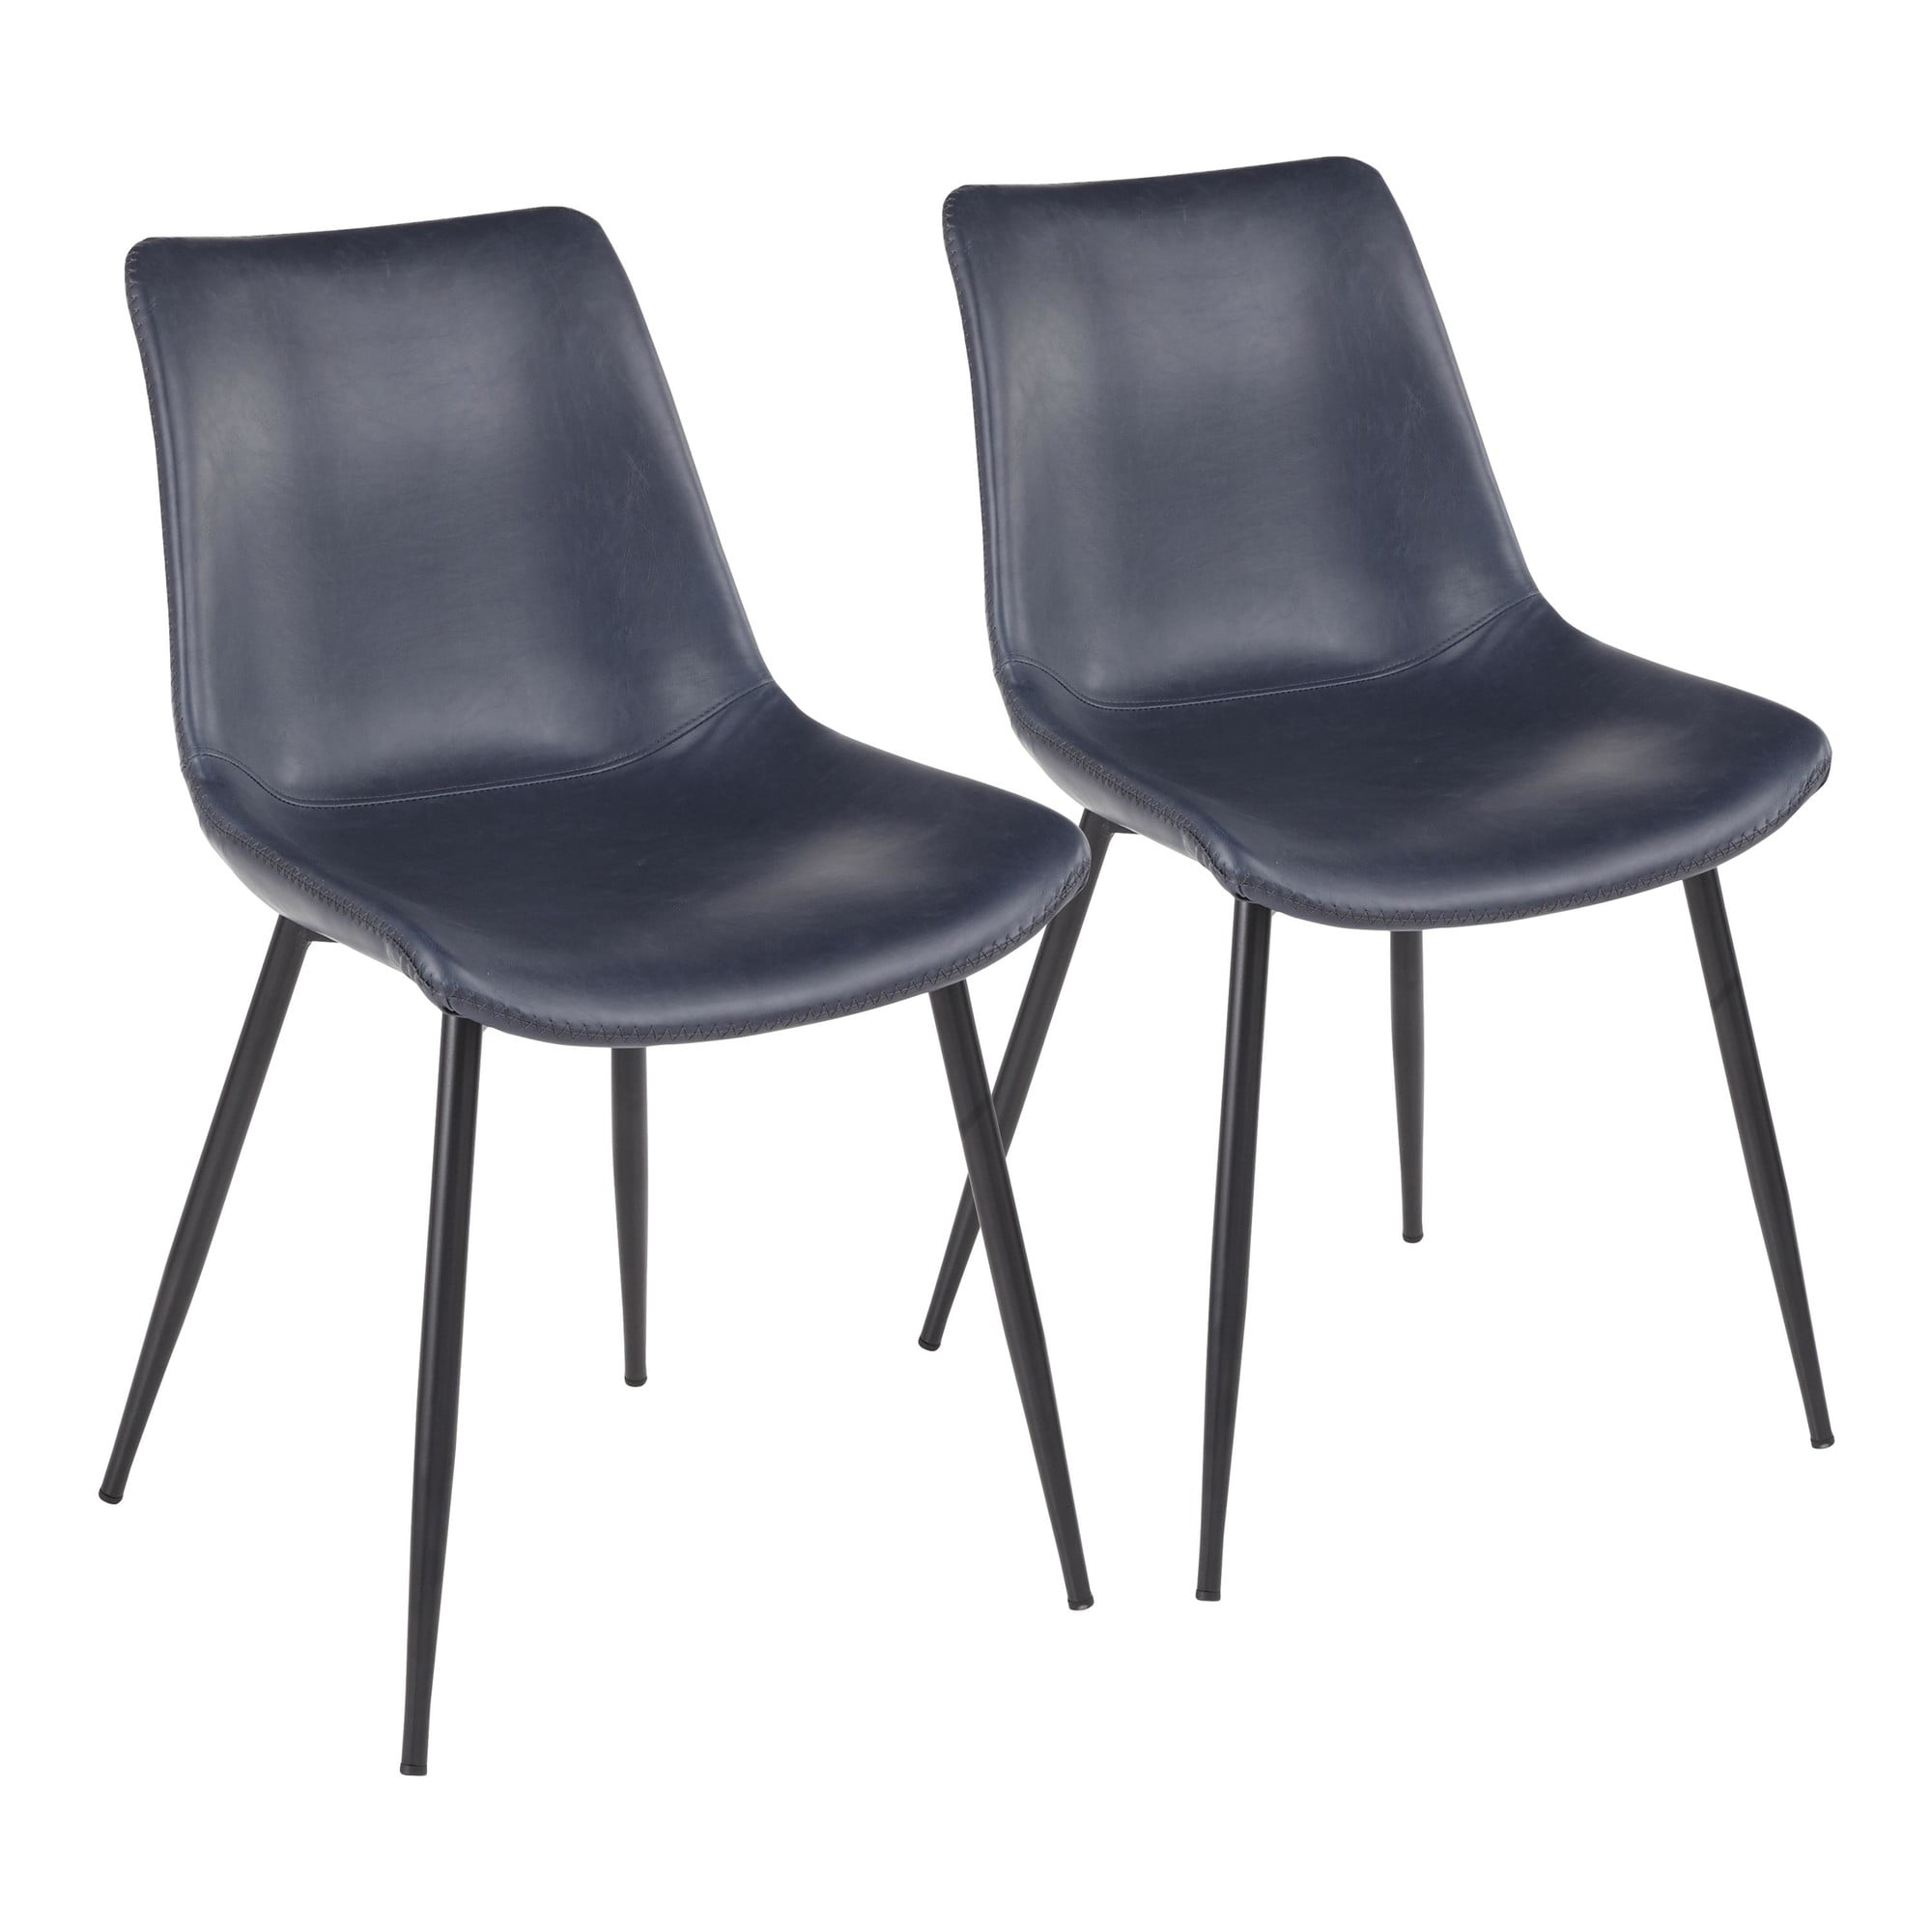 Durango Industrial Dining Chair in Black with Vintage Blue ...